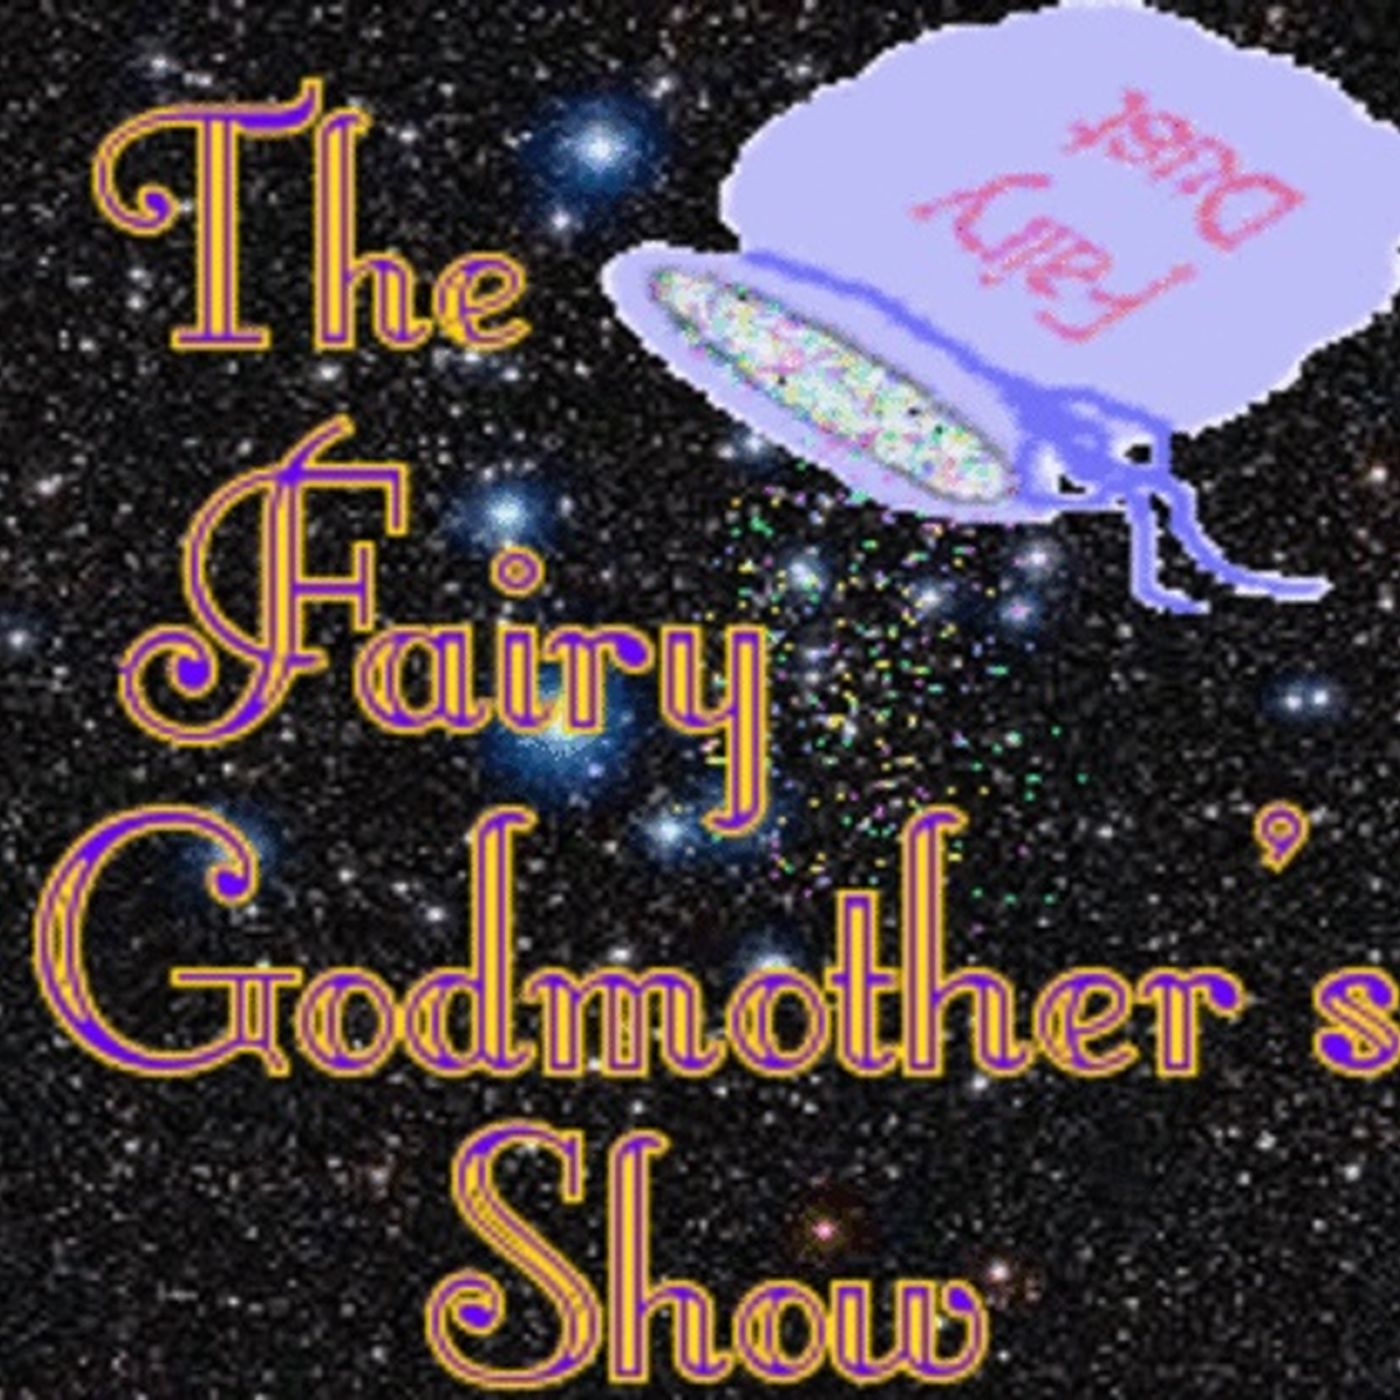 The Fairy Godmother's Show